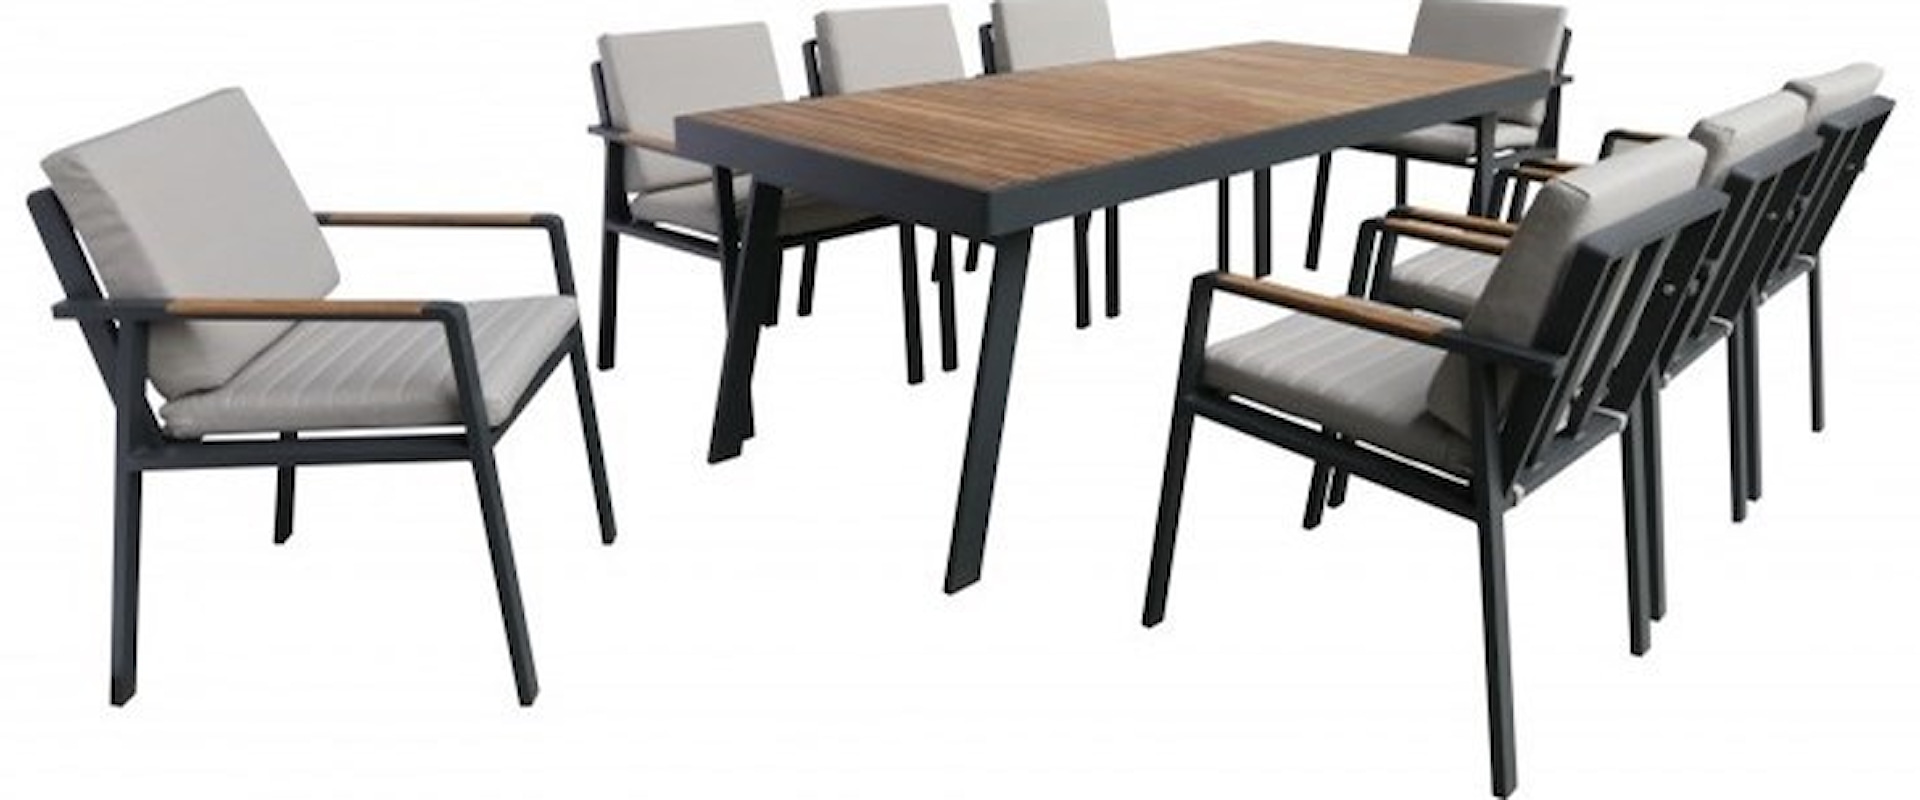 Outdoor Patio Dining Set in Charcoal Finish with Taupe Cushions